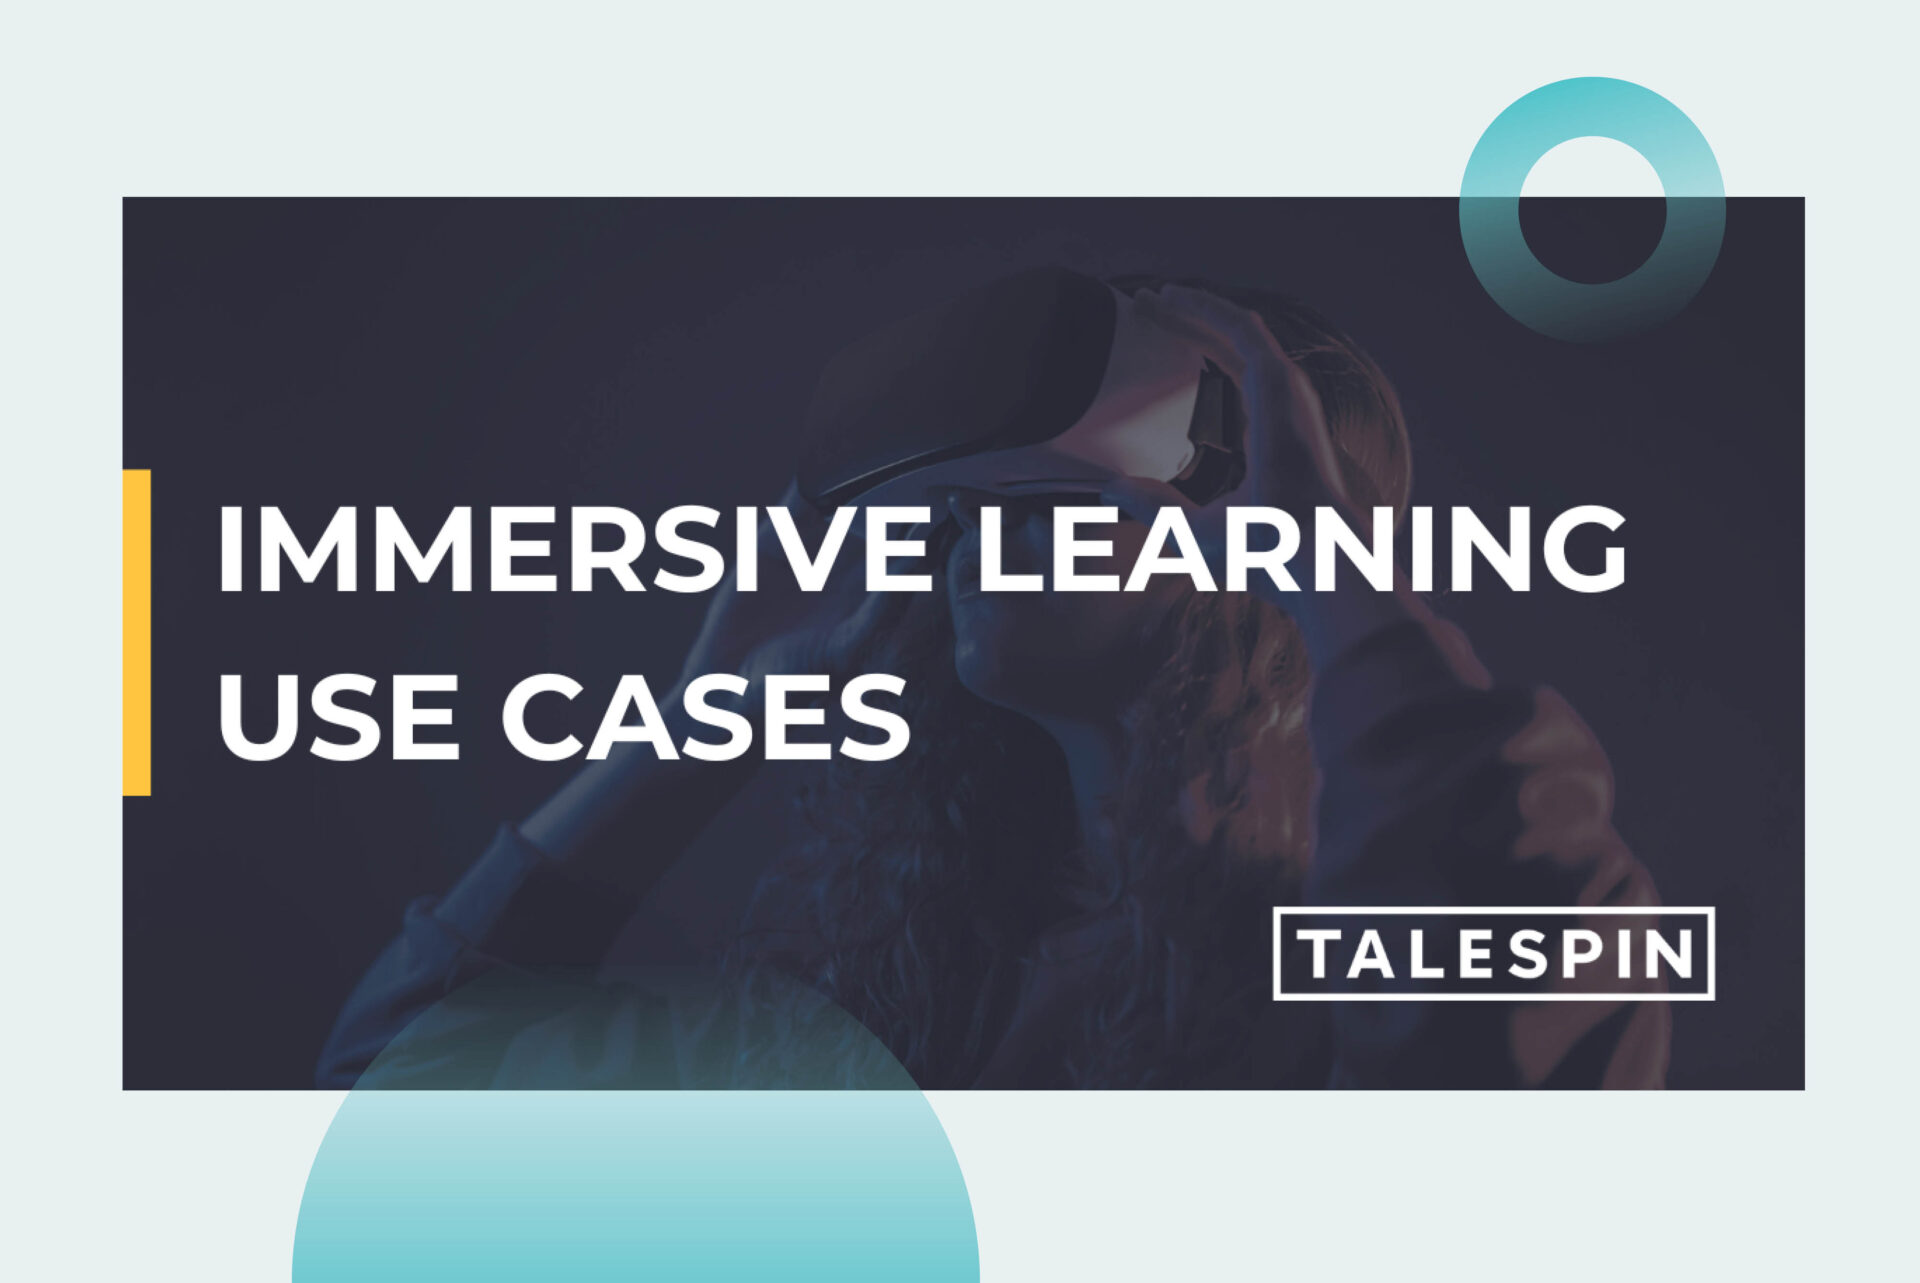 Immersive Learning Use Cases